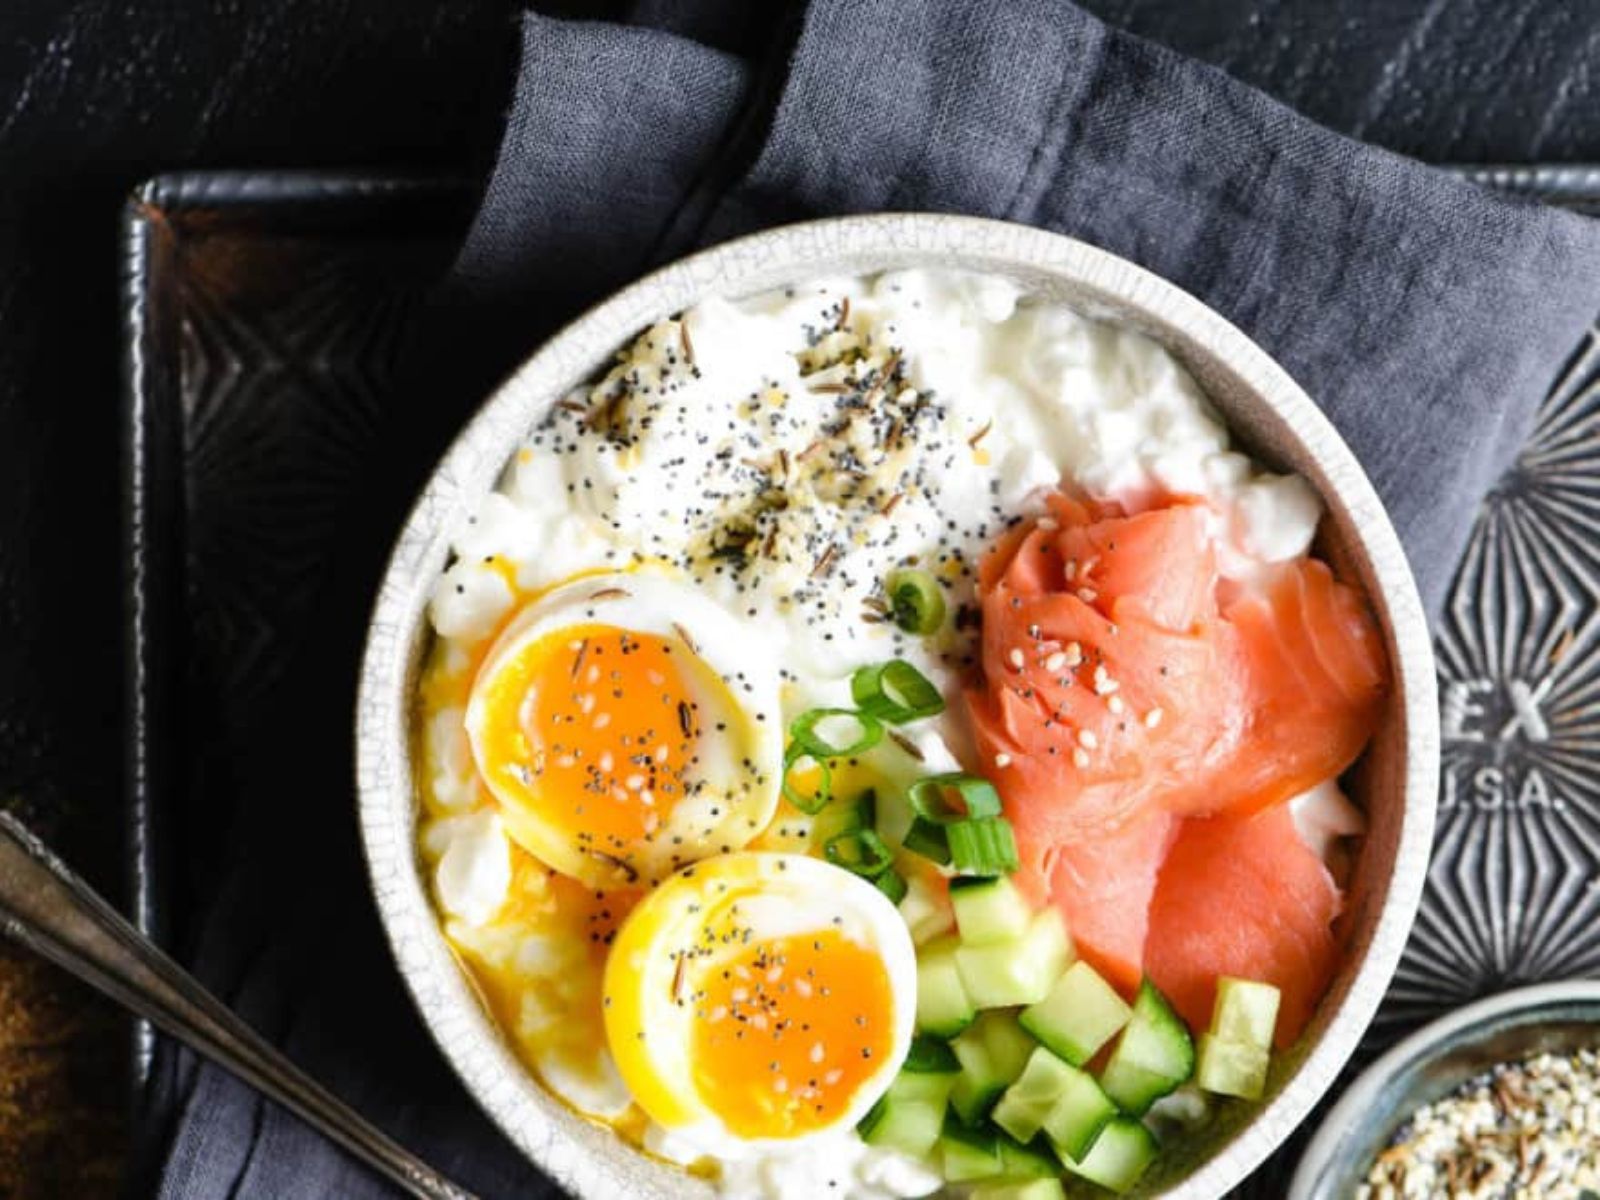 Cottage Cheese Recipes, Smoked Salmon Bowls, Courtesy of Foxes Love Lemons